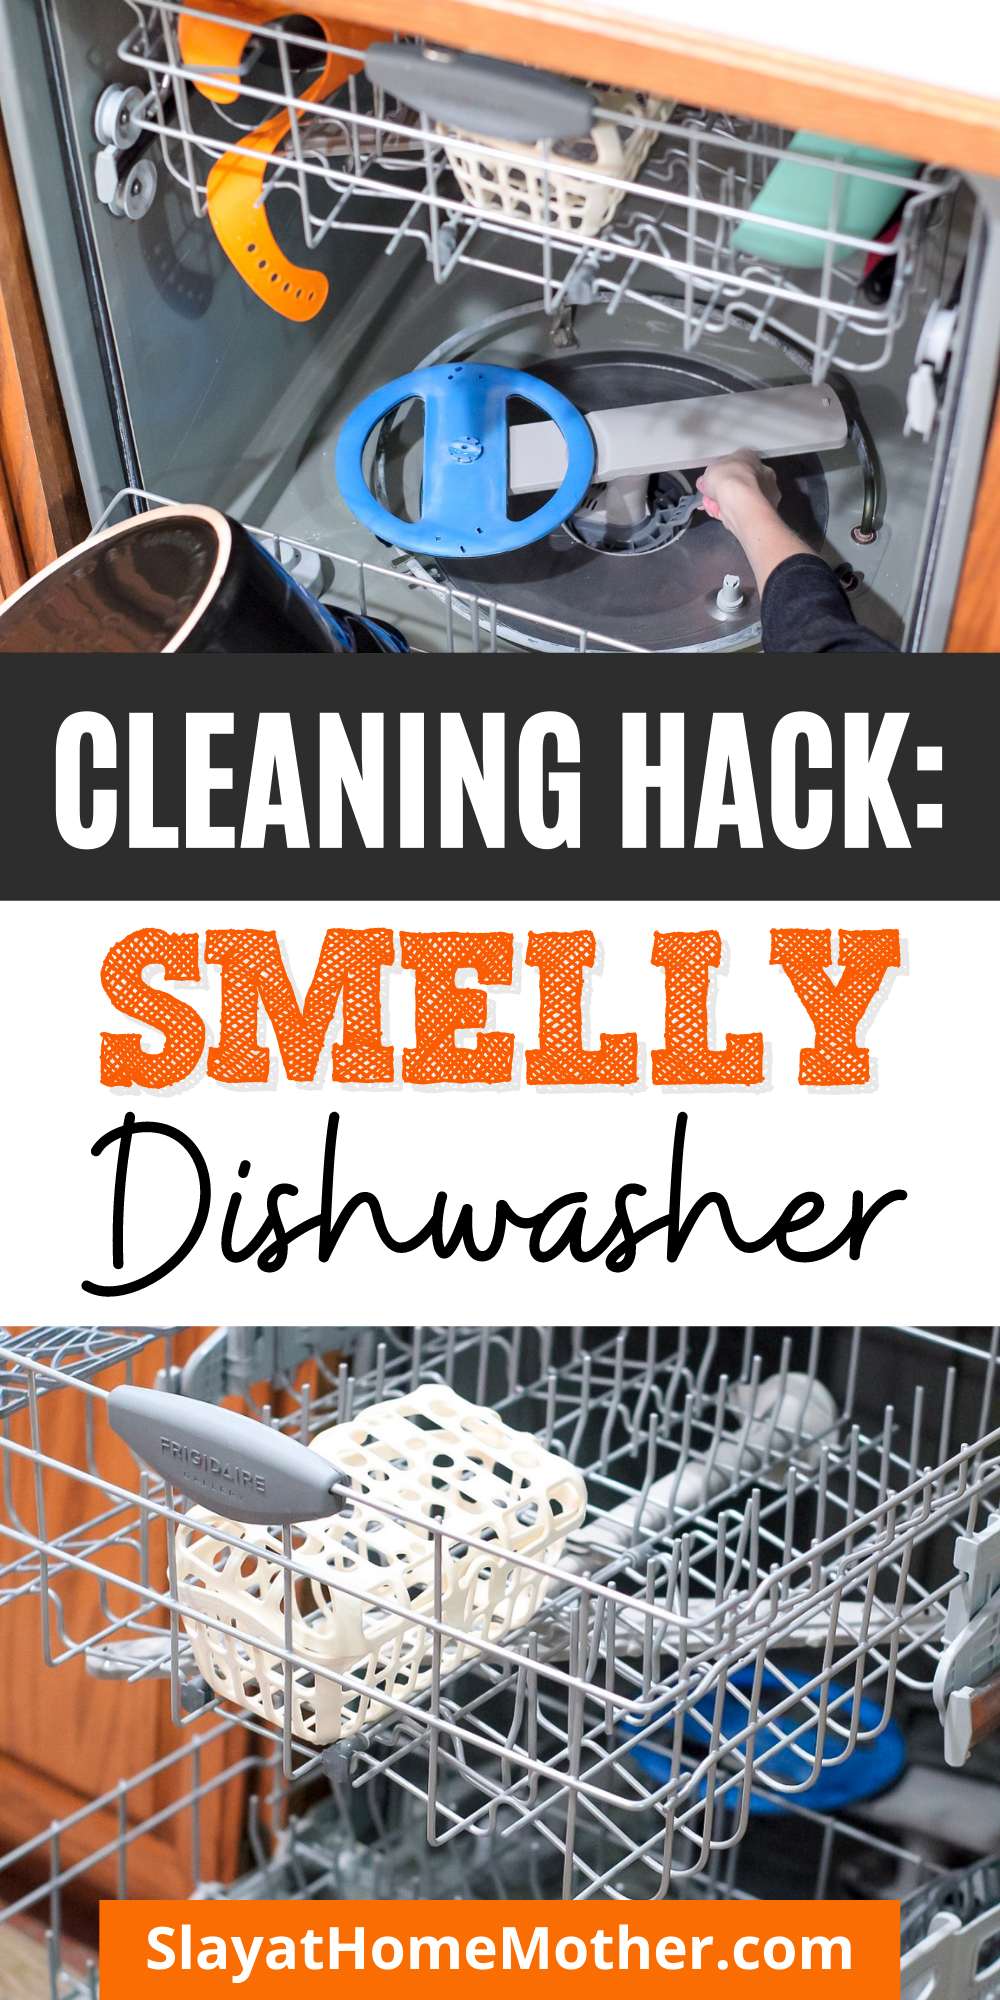 How To Clean A Smelly Dishwasher - EASY CLEANING HACK!